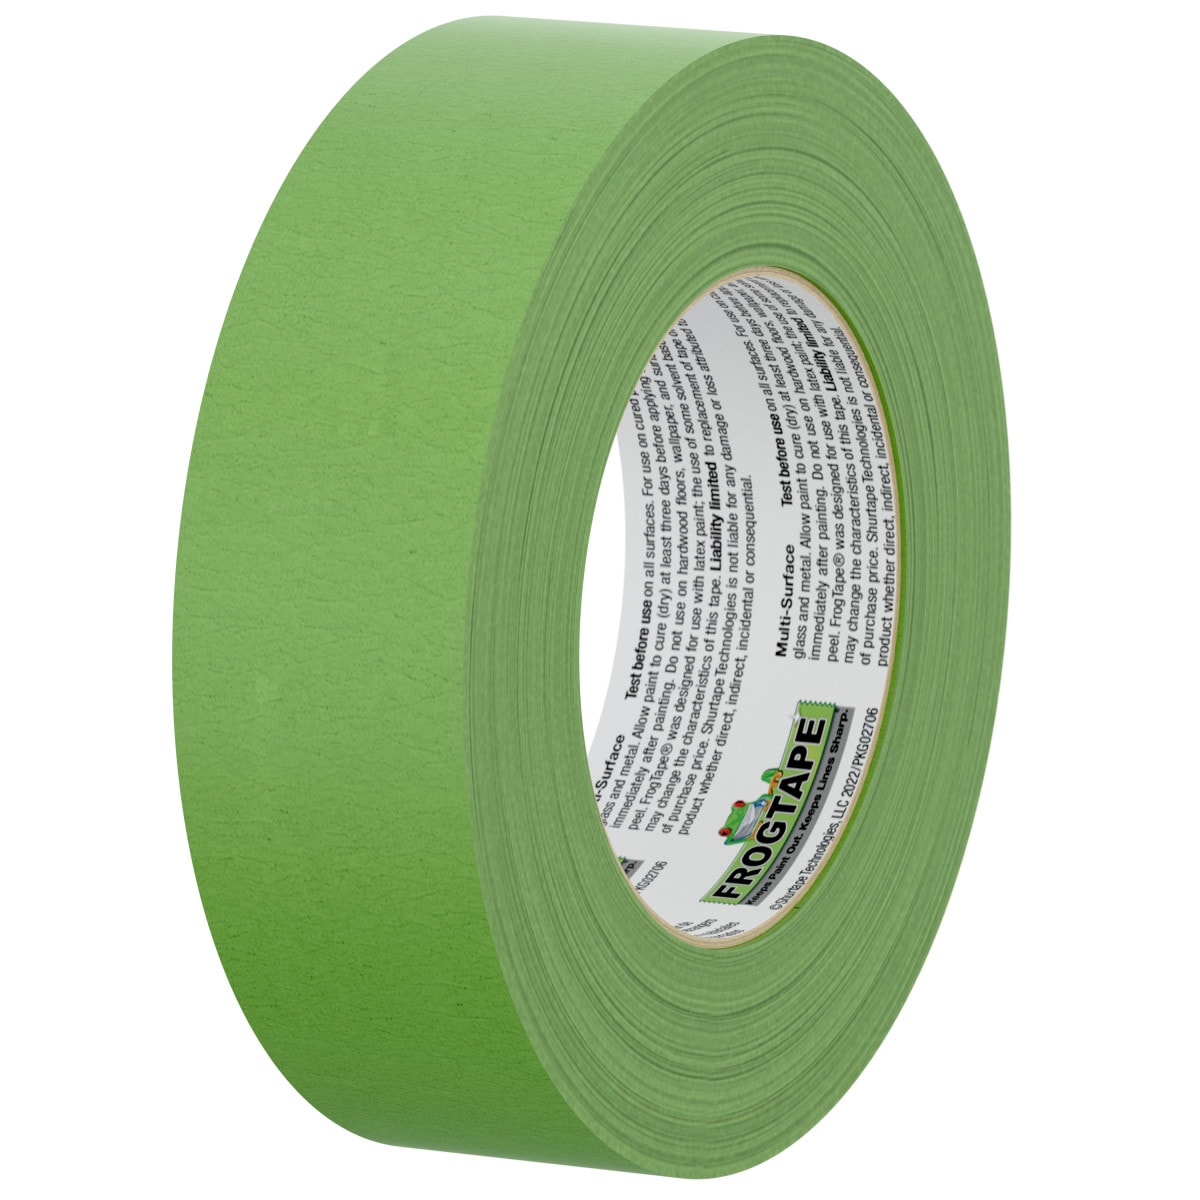 FrogTape® Multi-Surface Painting Tape